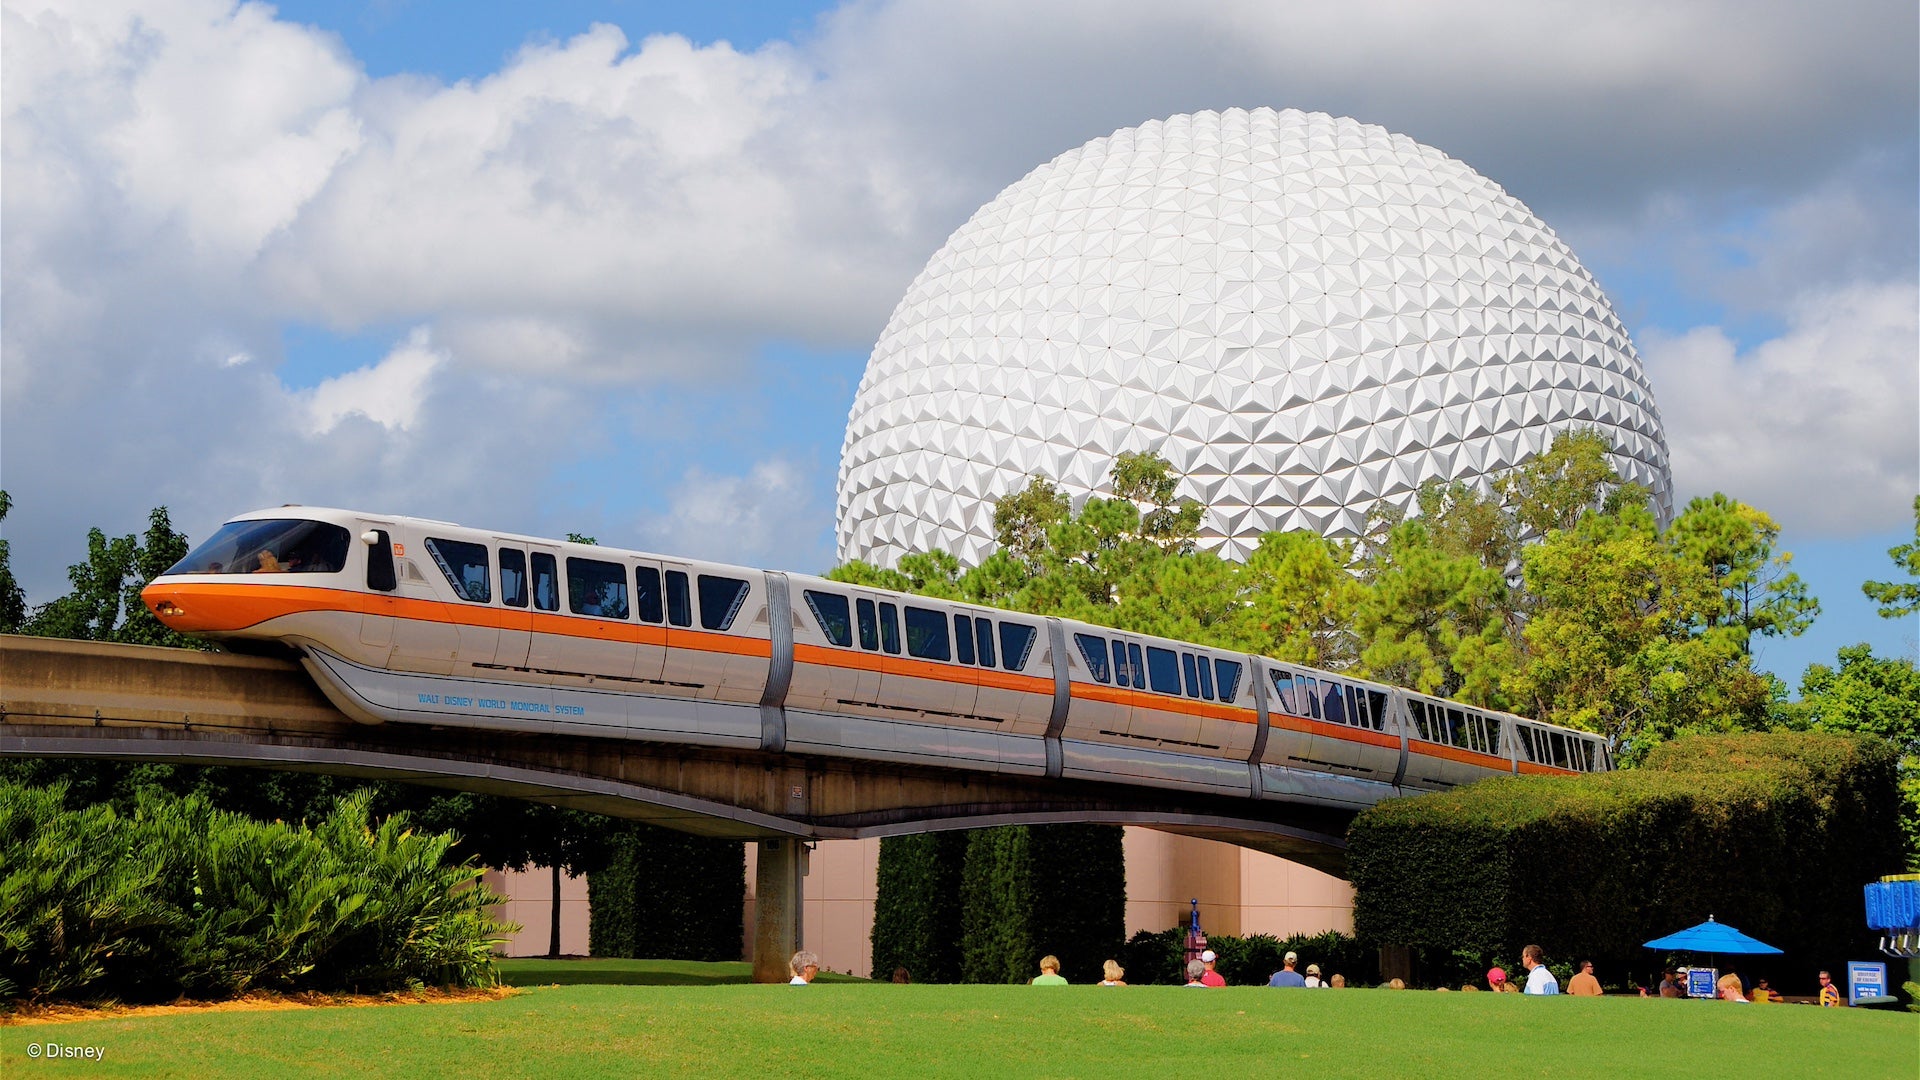 Monorail in front of Spaceship earth under a cloudy blue sky